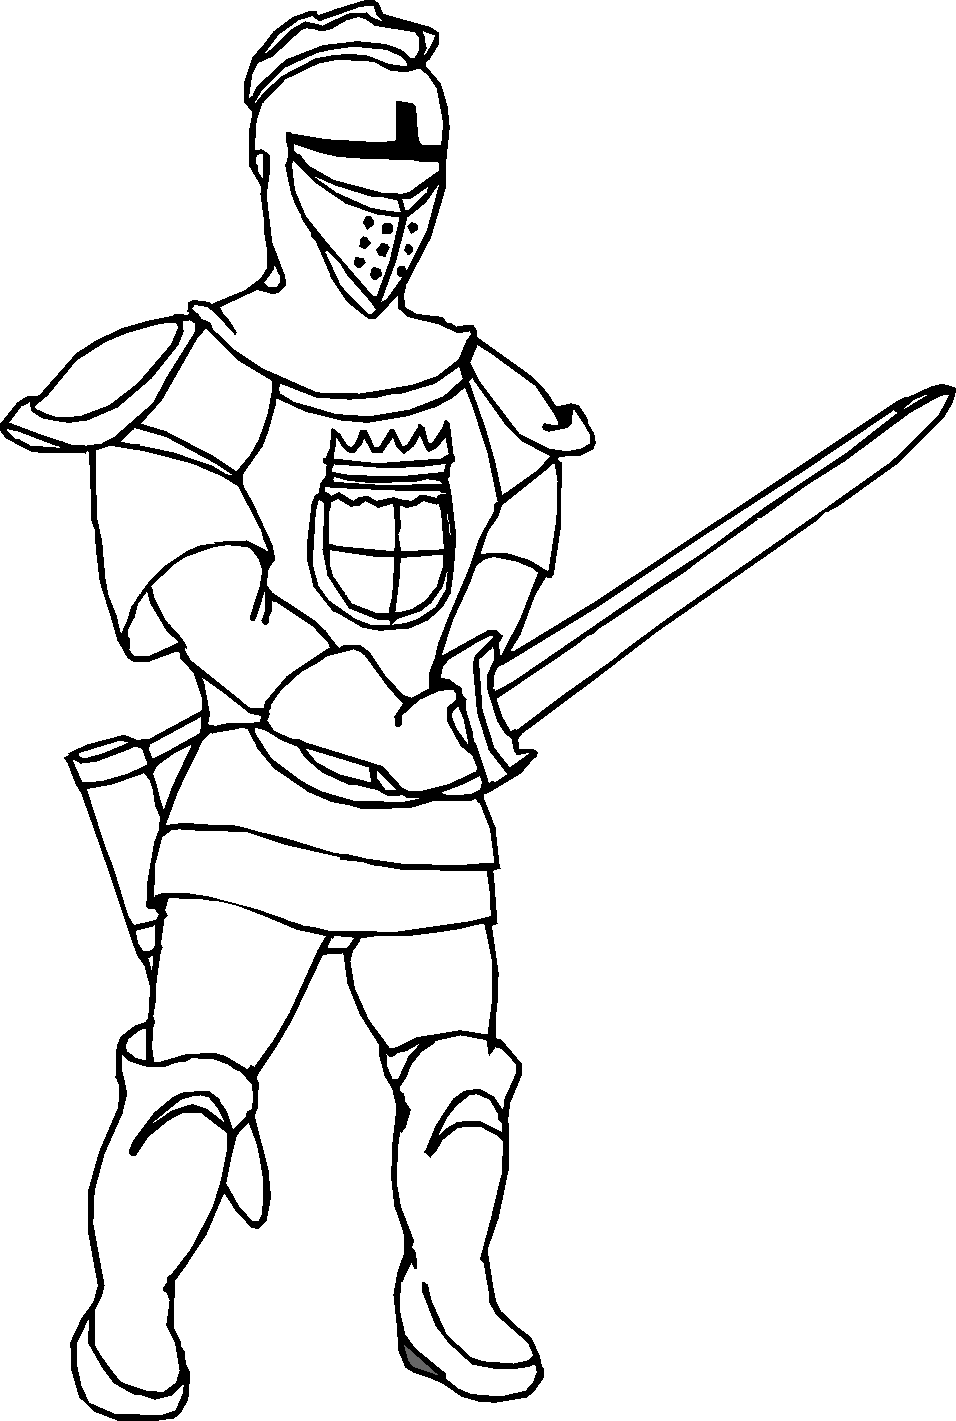 Free Coloring Pages For Kids: coloring knights